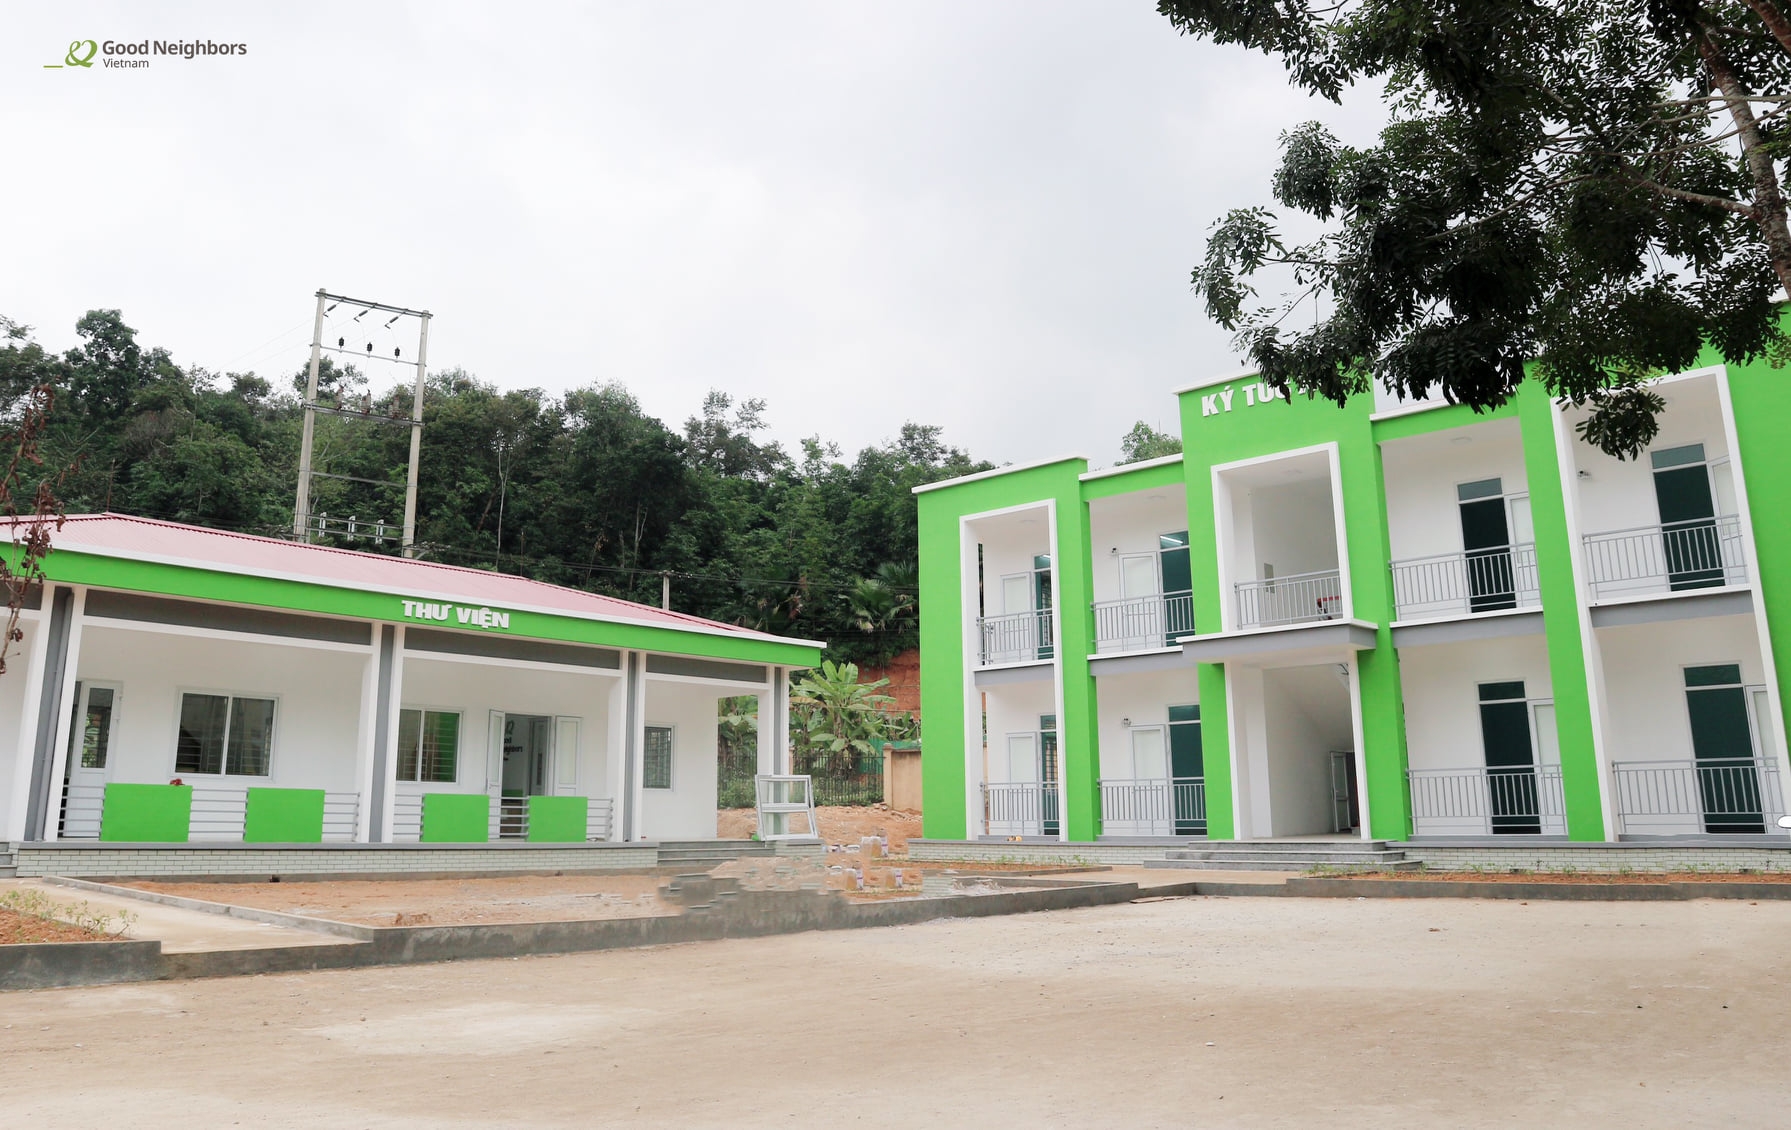 Korean ngo builds new dormitory and library for vietnam's rural boarding school